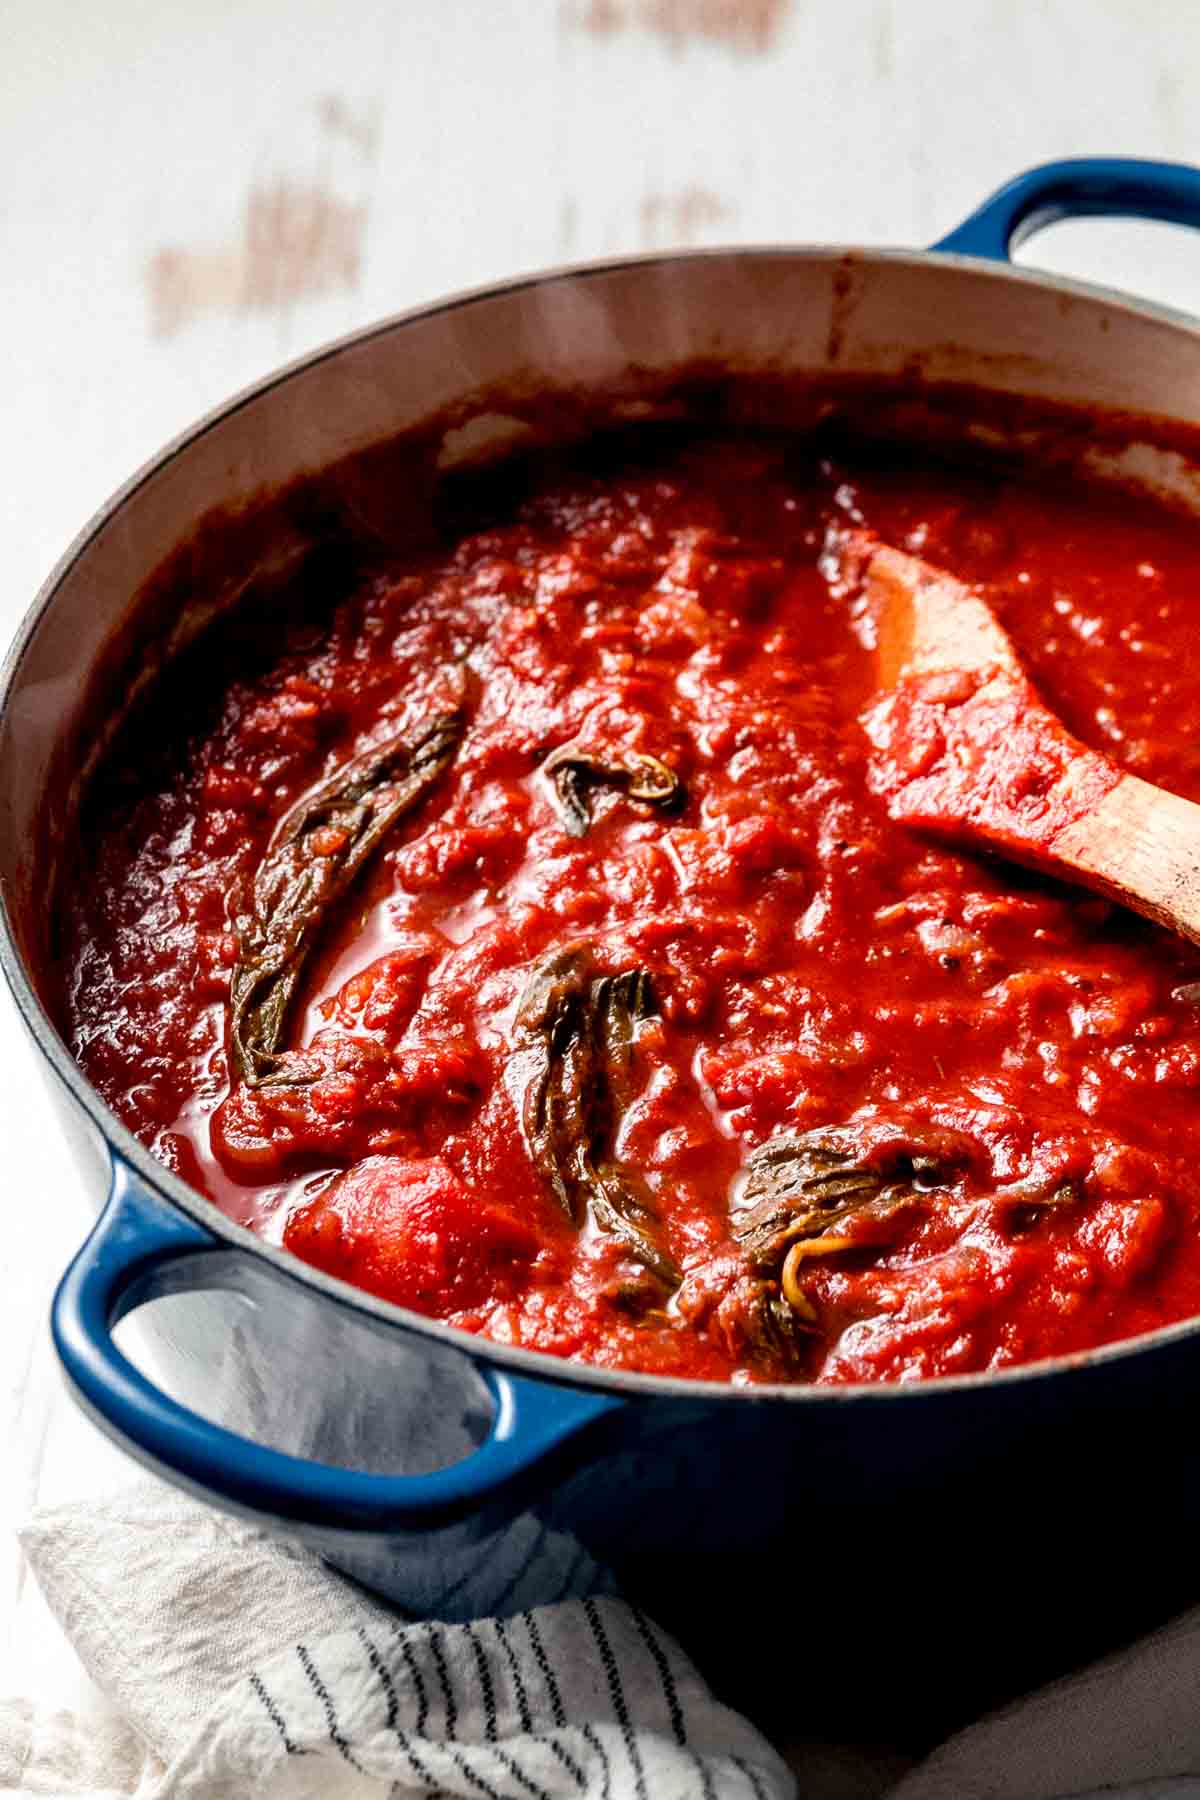 A large blue le crueset pot full of gluten-free tomato sauce. Wilted basil and a wooden spoon rest on top.